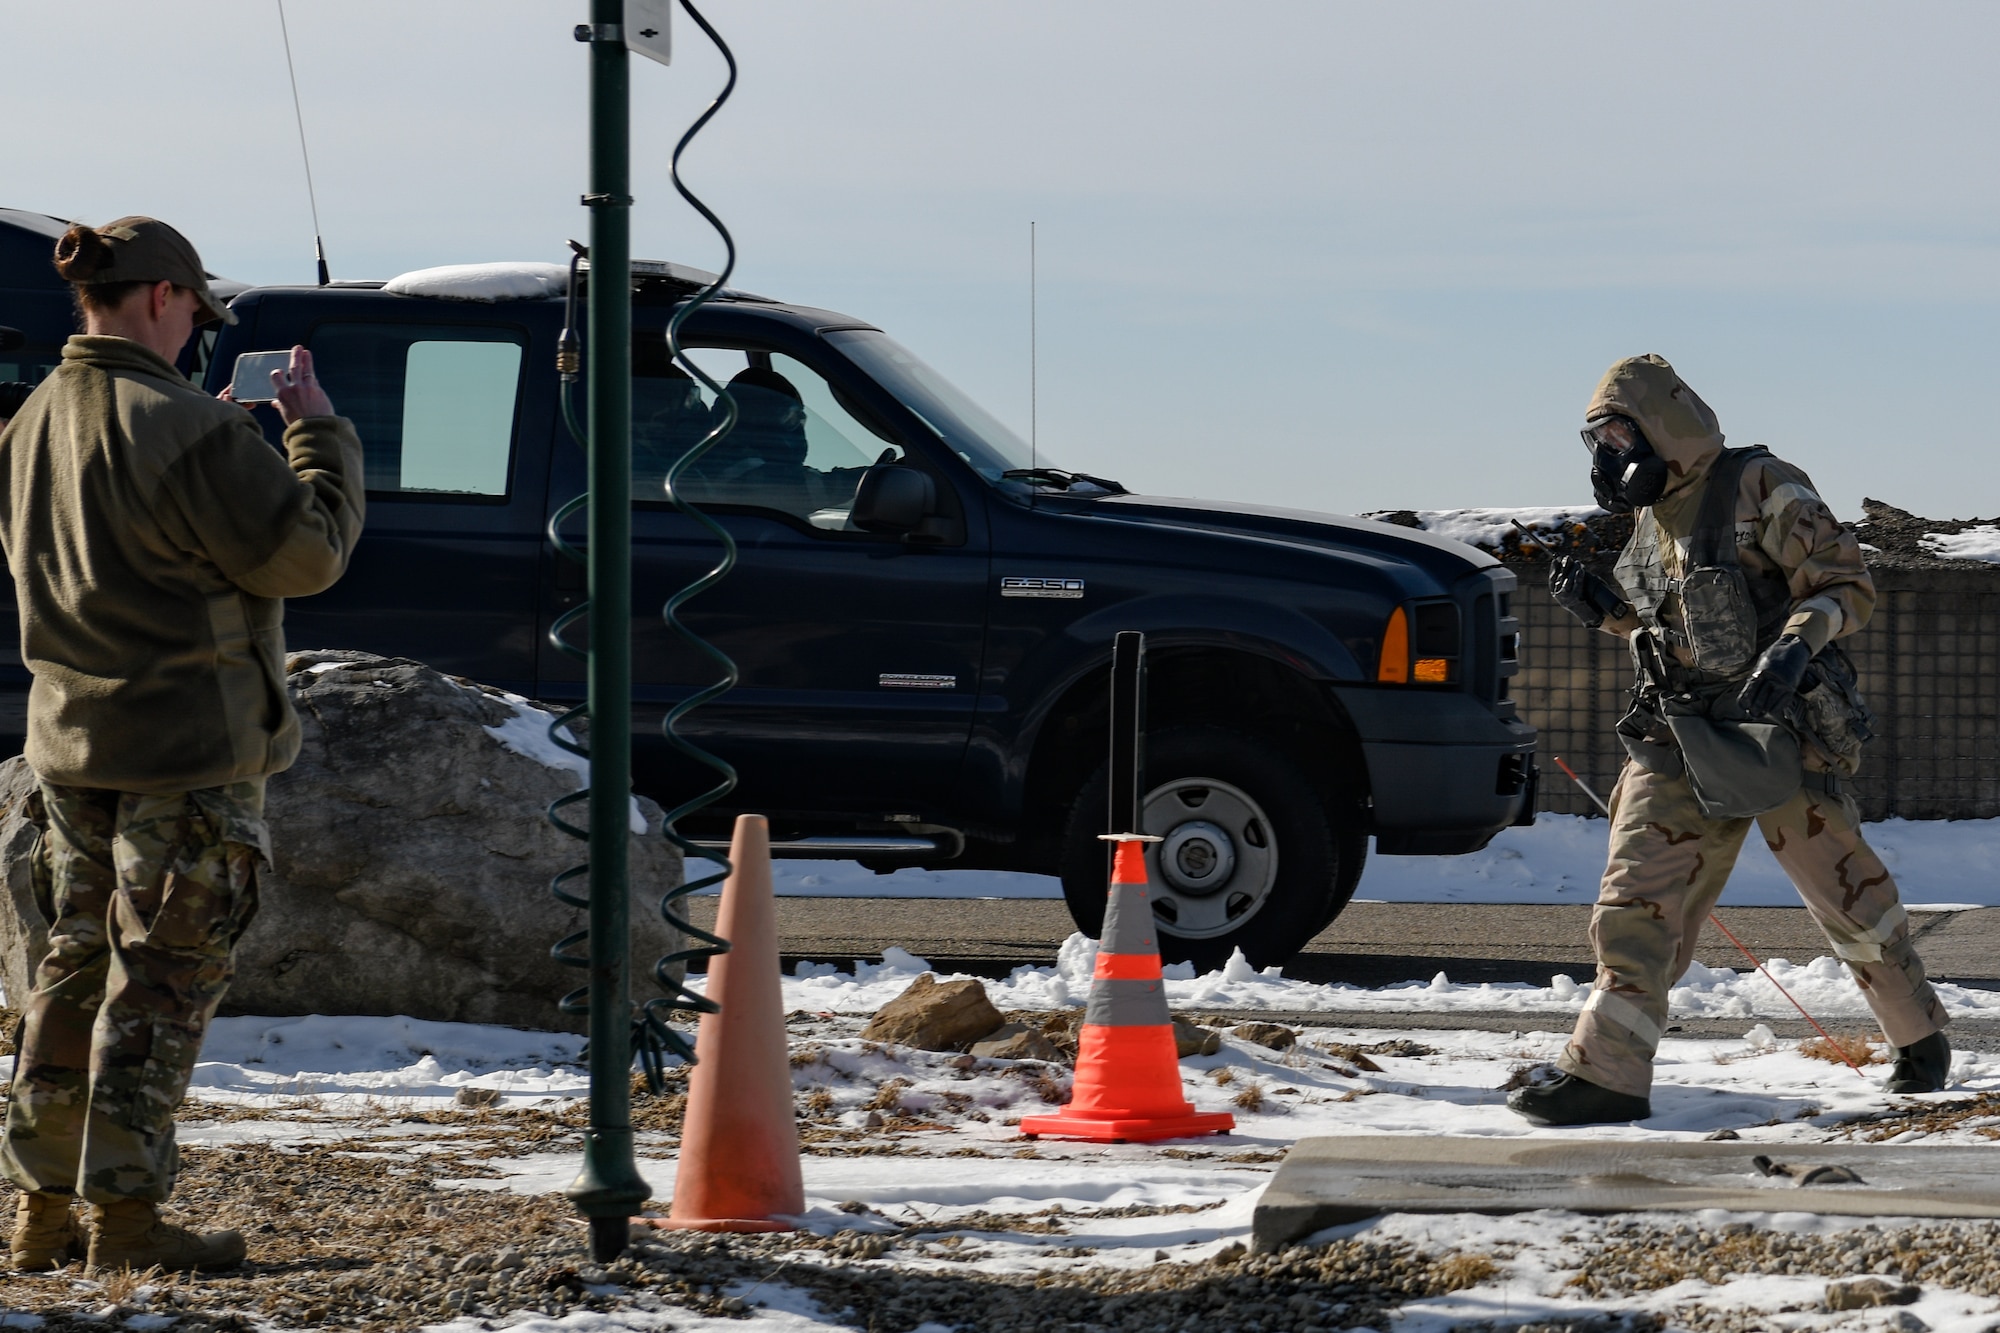 The 910th Civil Engineer Squadron’s emergency management flight conducted a chemical, biological, radiological, nuclear and high-yield explosives response training event on March 14, 2022, at Youngstown Air Reserve Station, Ohio.